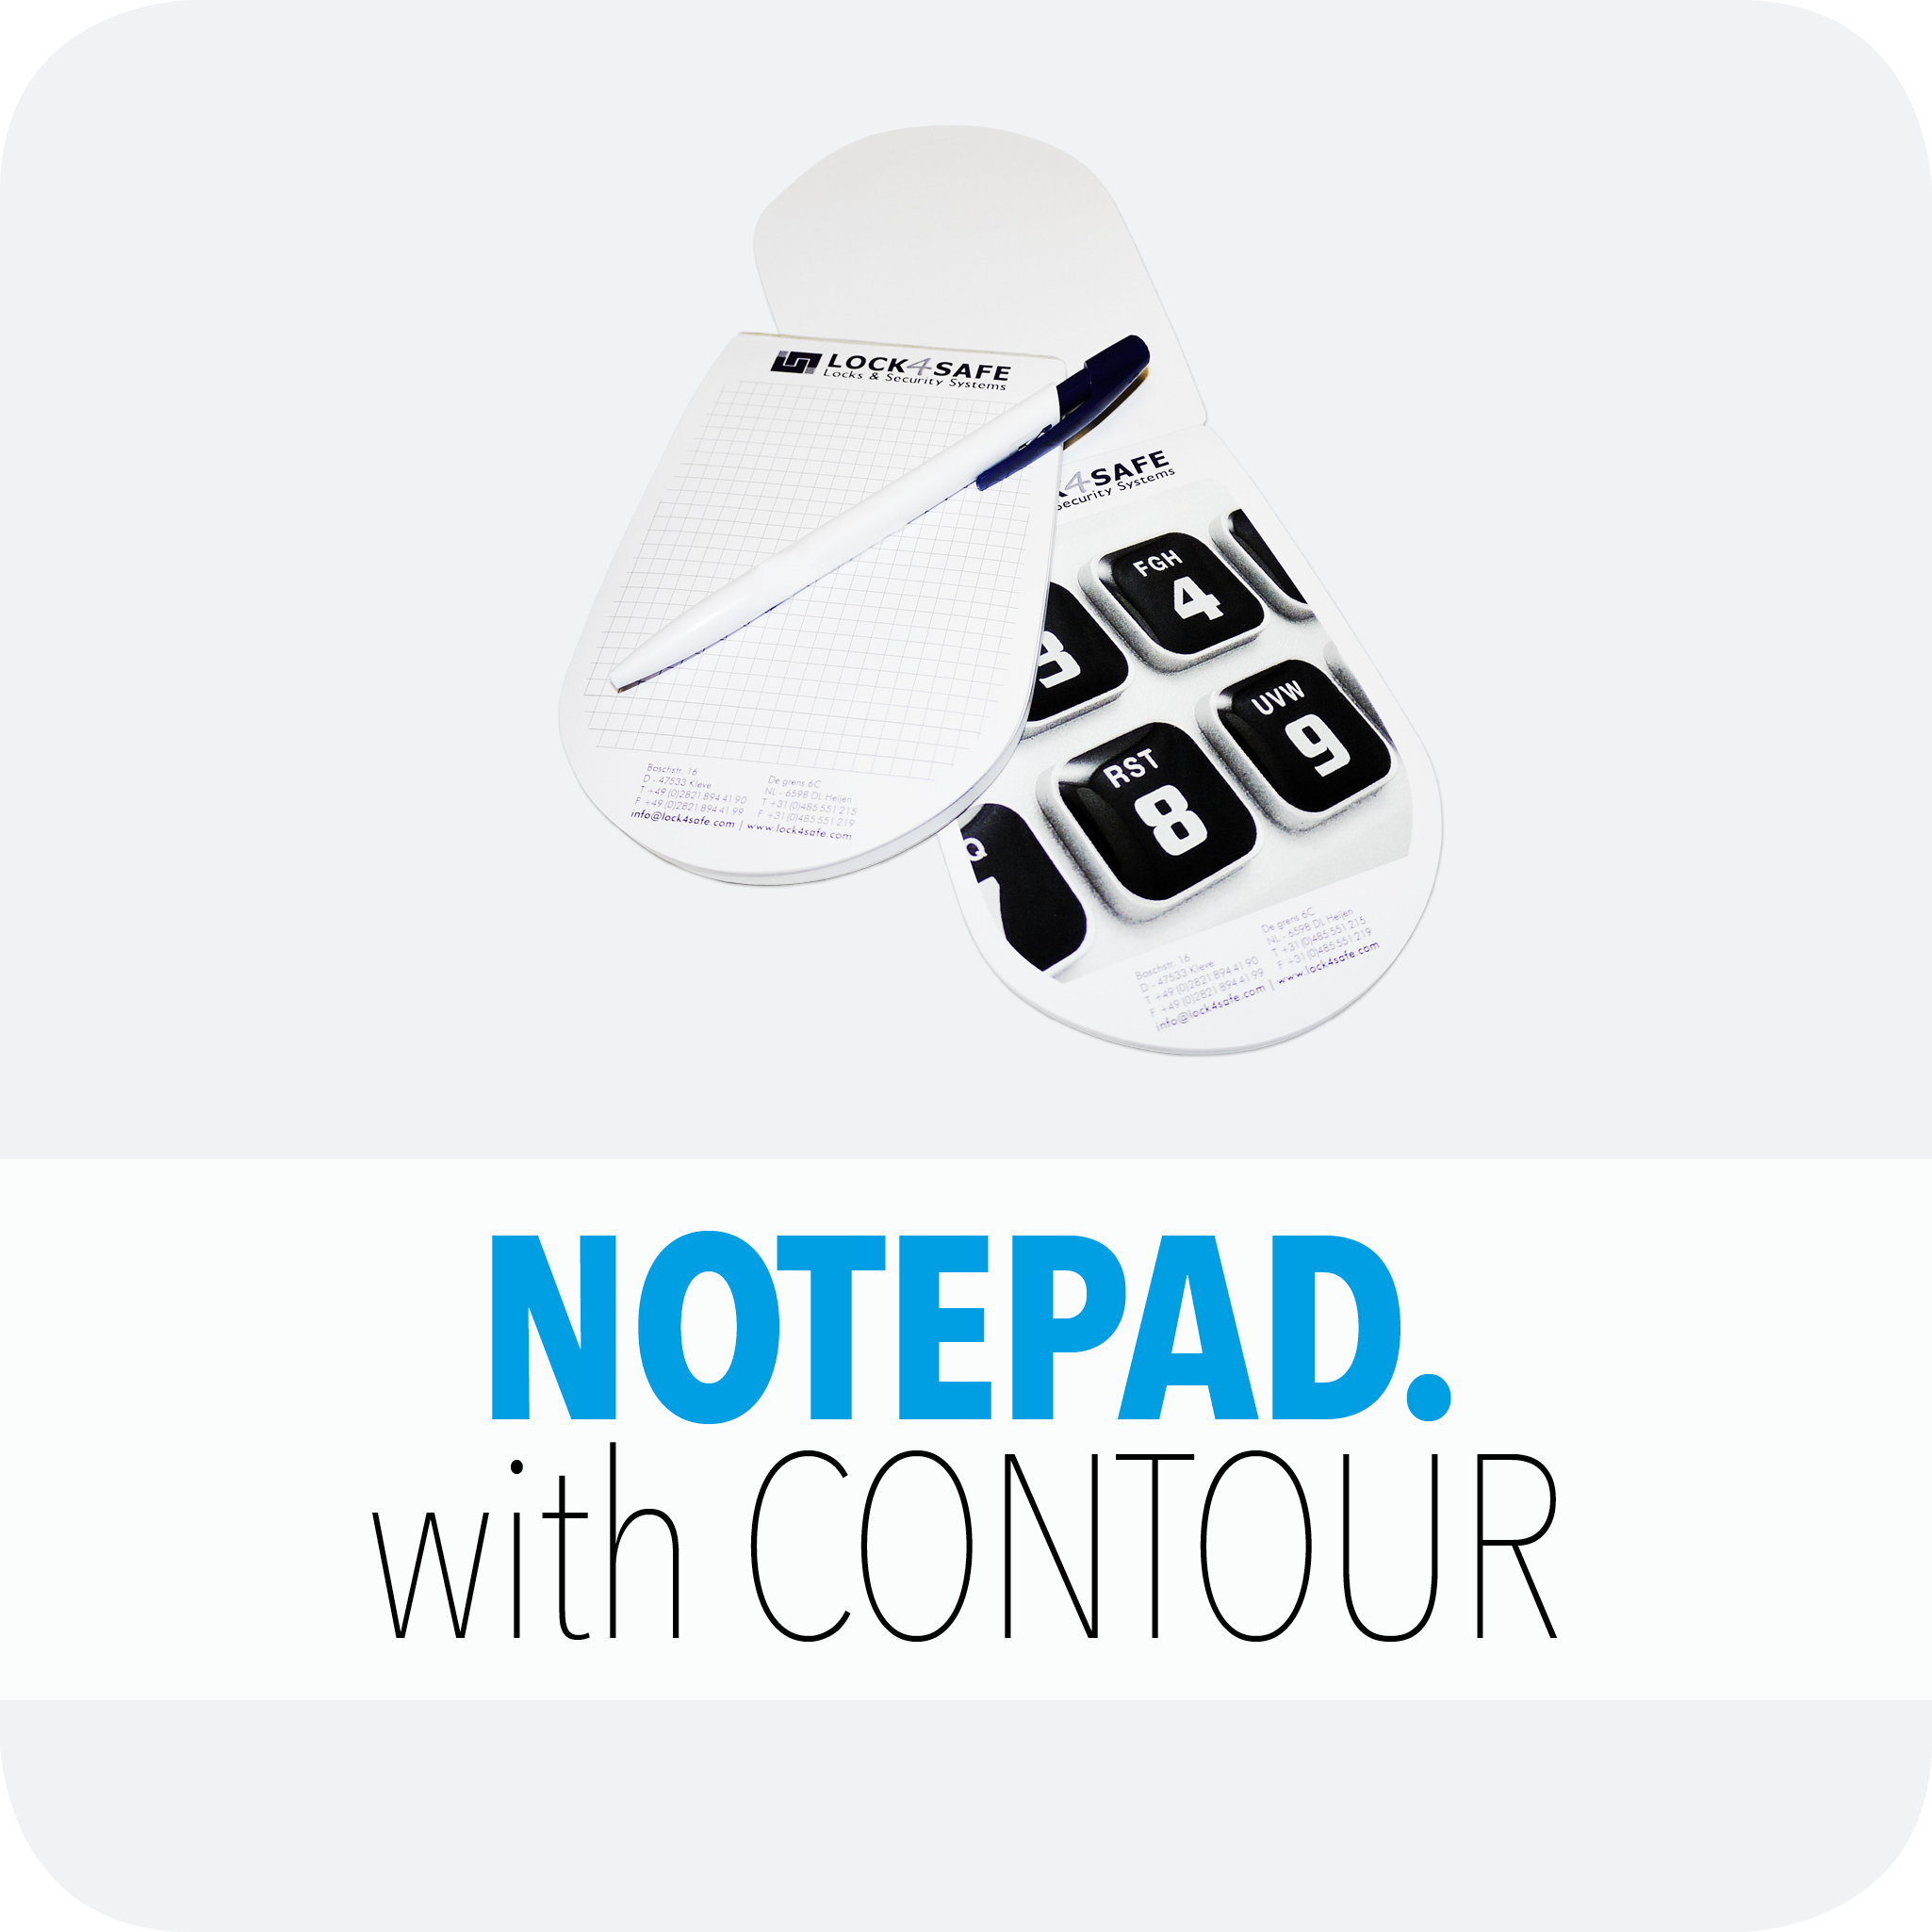 Notepad with contour